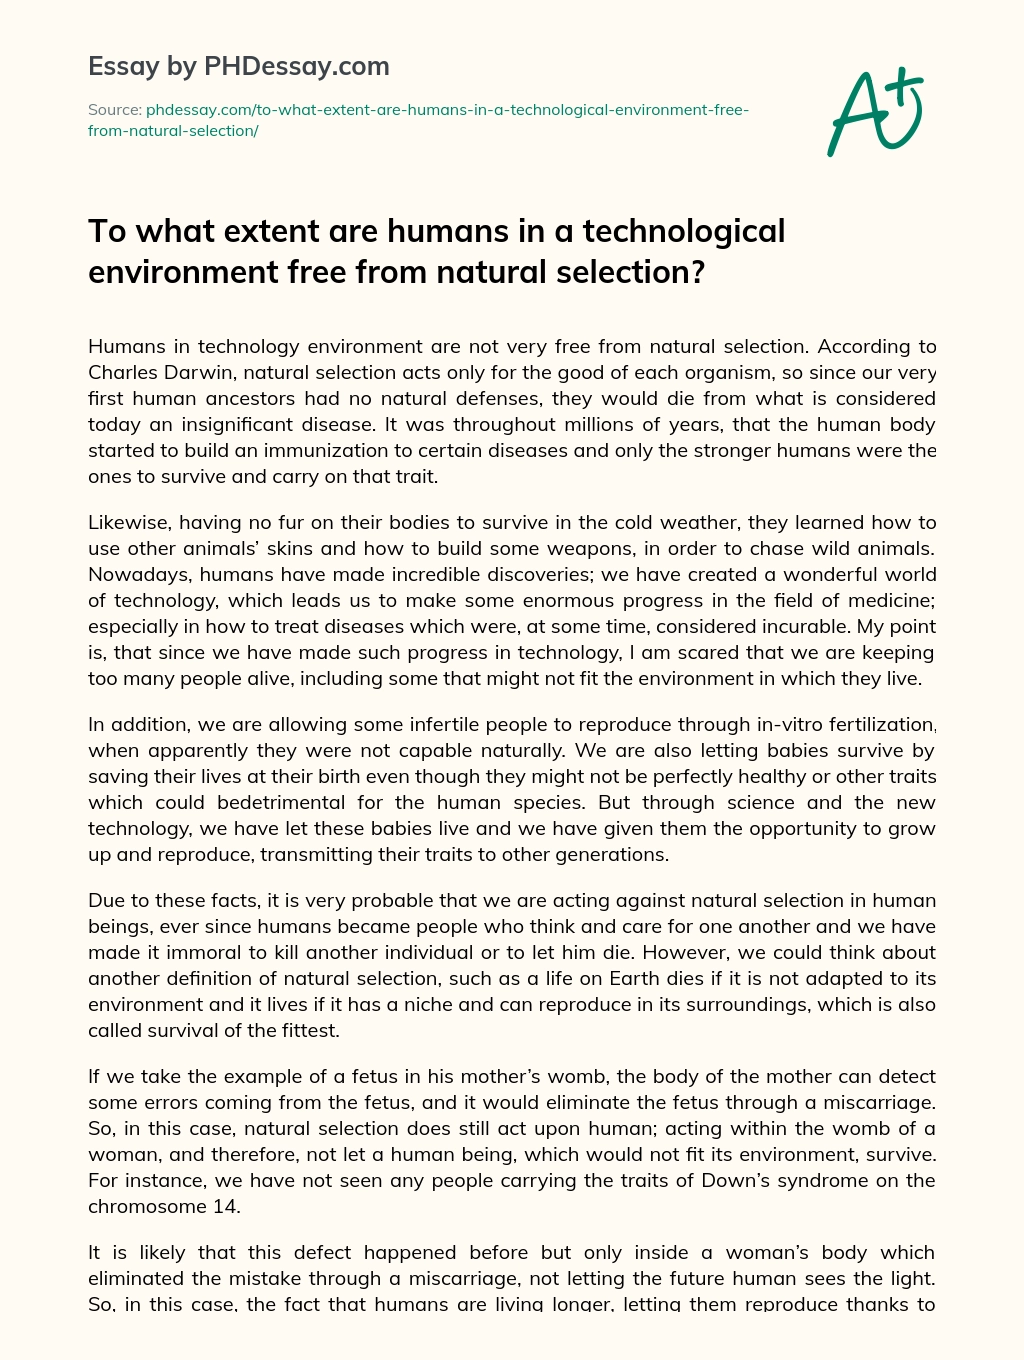 To what extent are humans in a technological environment free from natural selection? essay